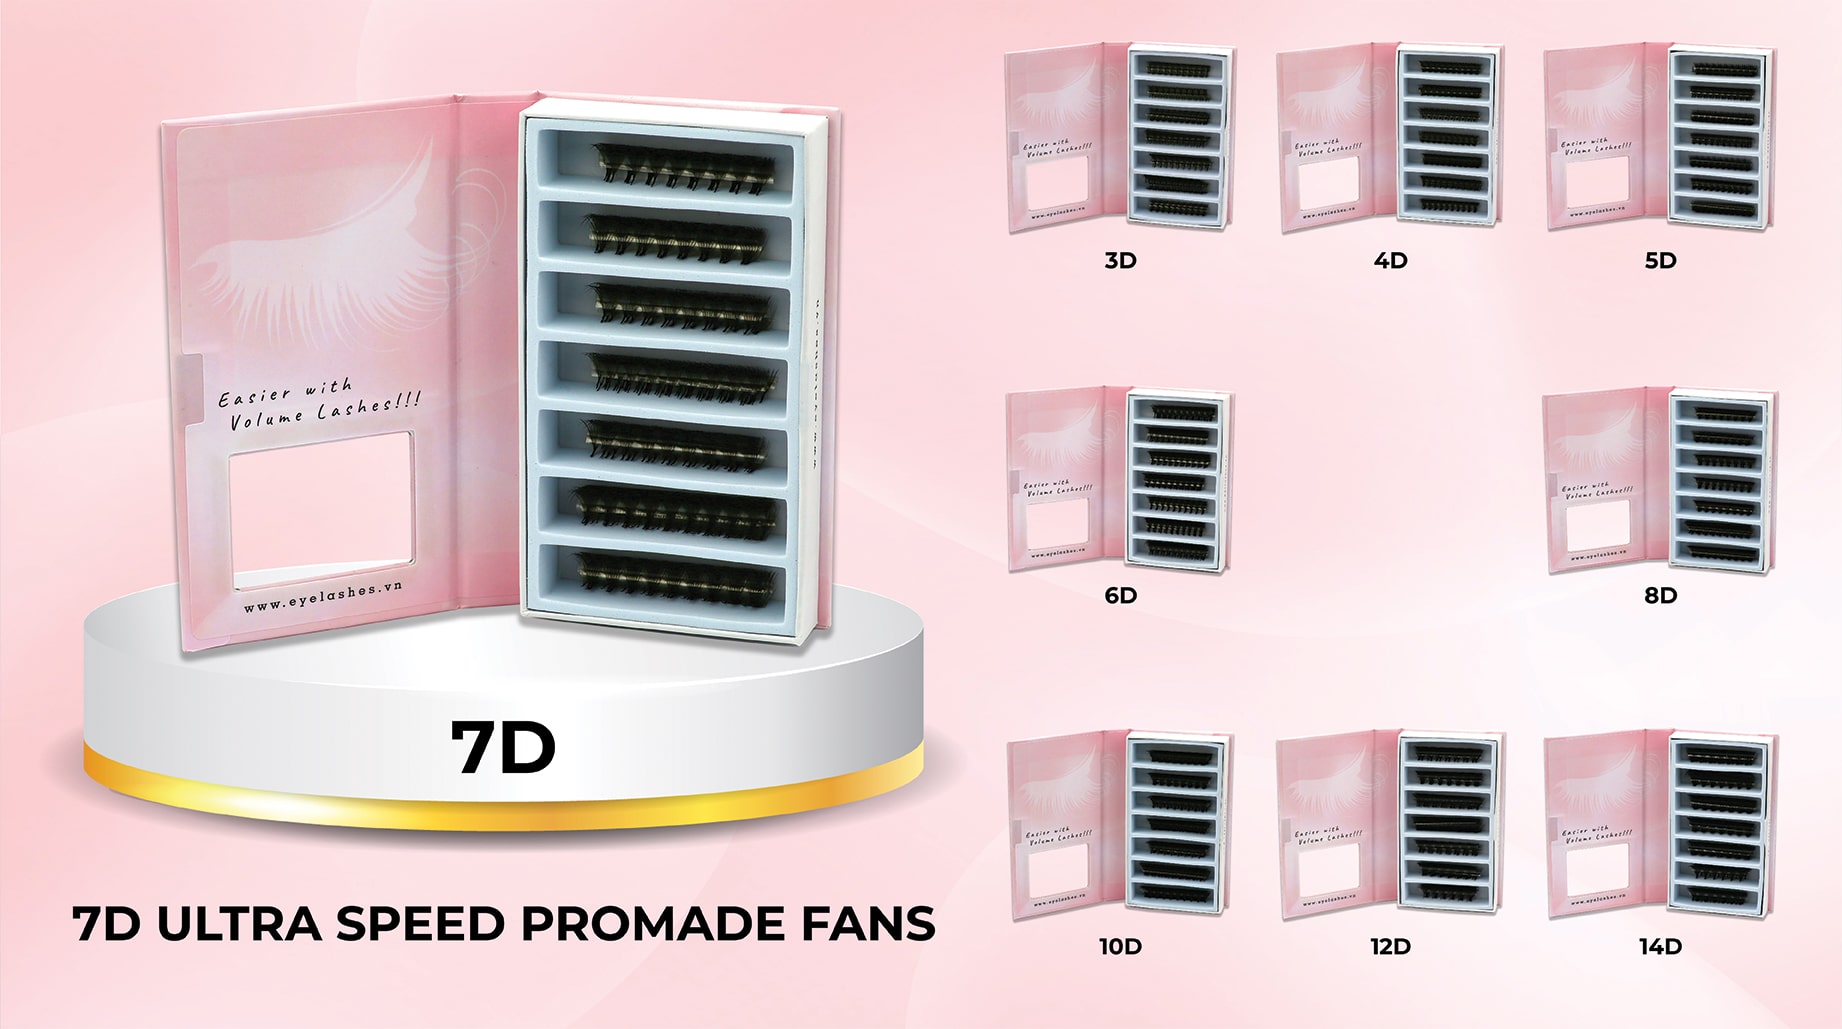 Ultra-Speed-7D-promade-fan-wholesale-eyelash-supplier-VNLASHES